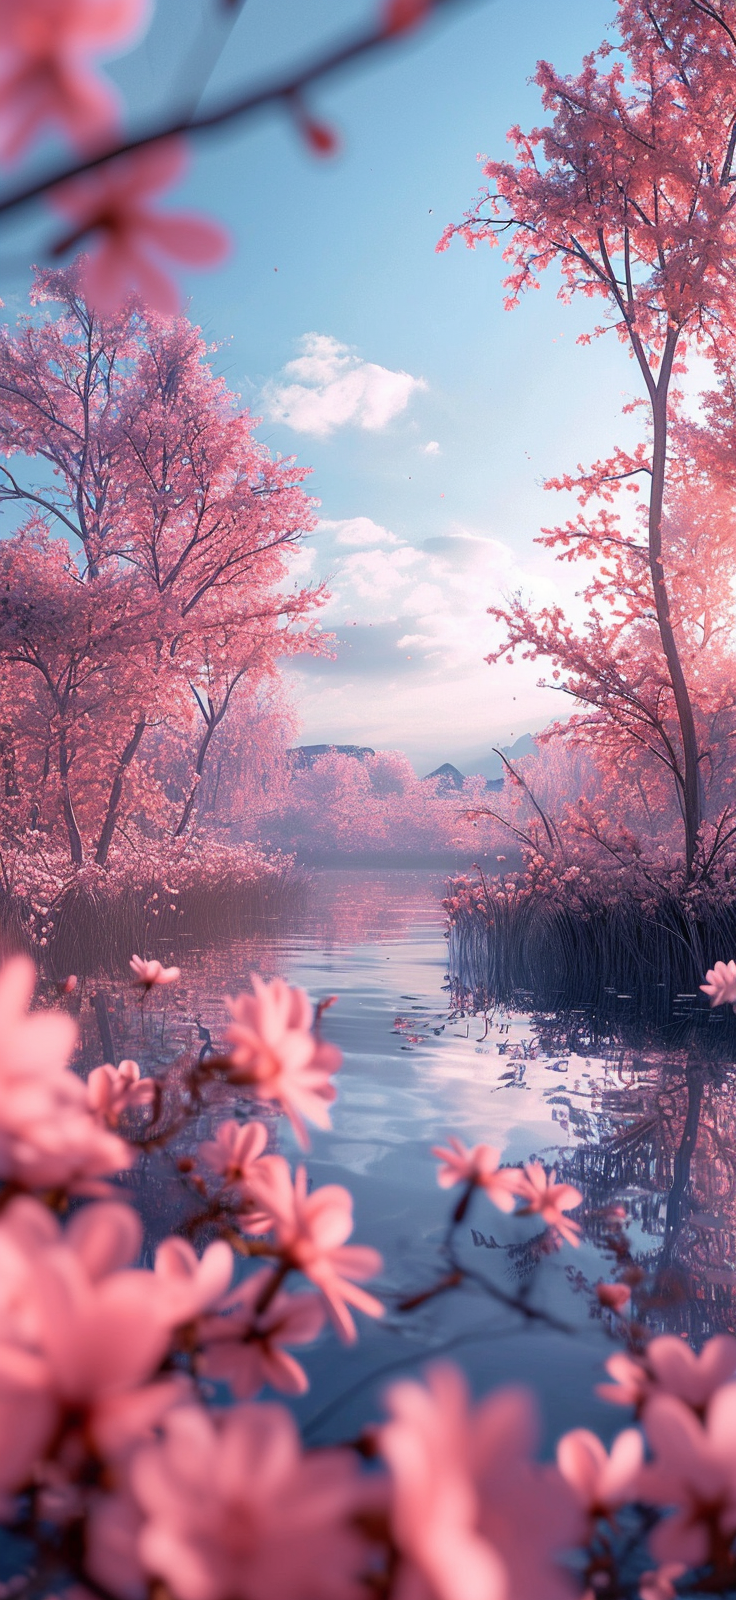 Immerse yourself in the serenity of springtime with this stunning mobile wallpaper!